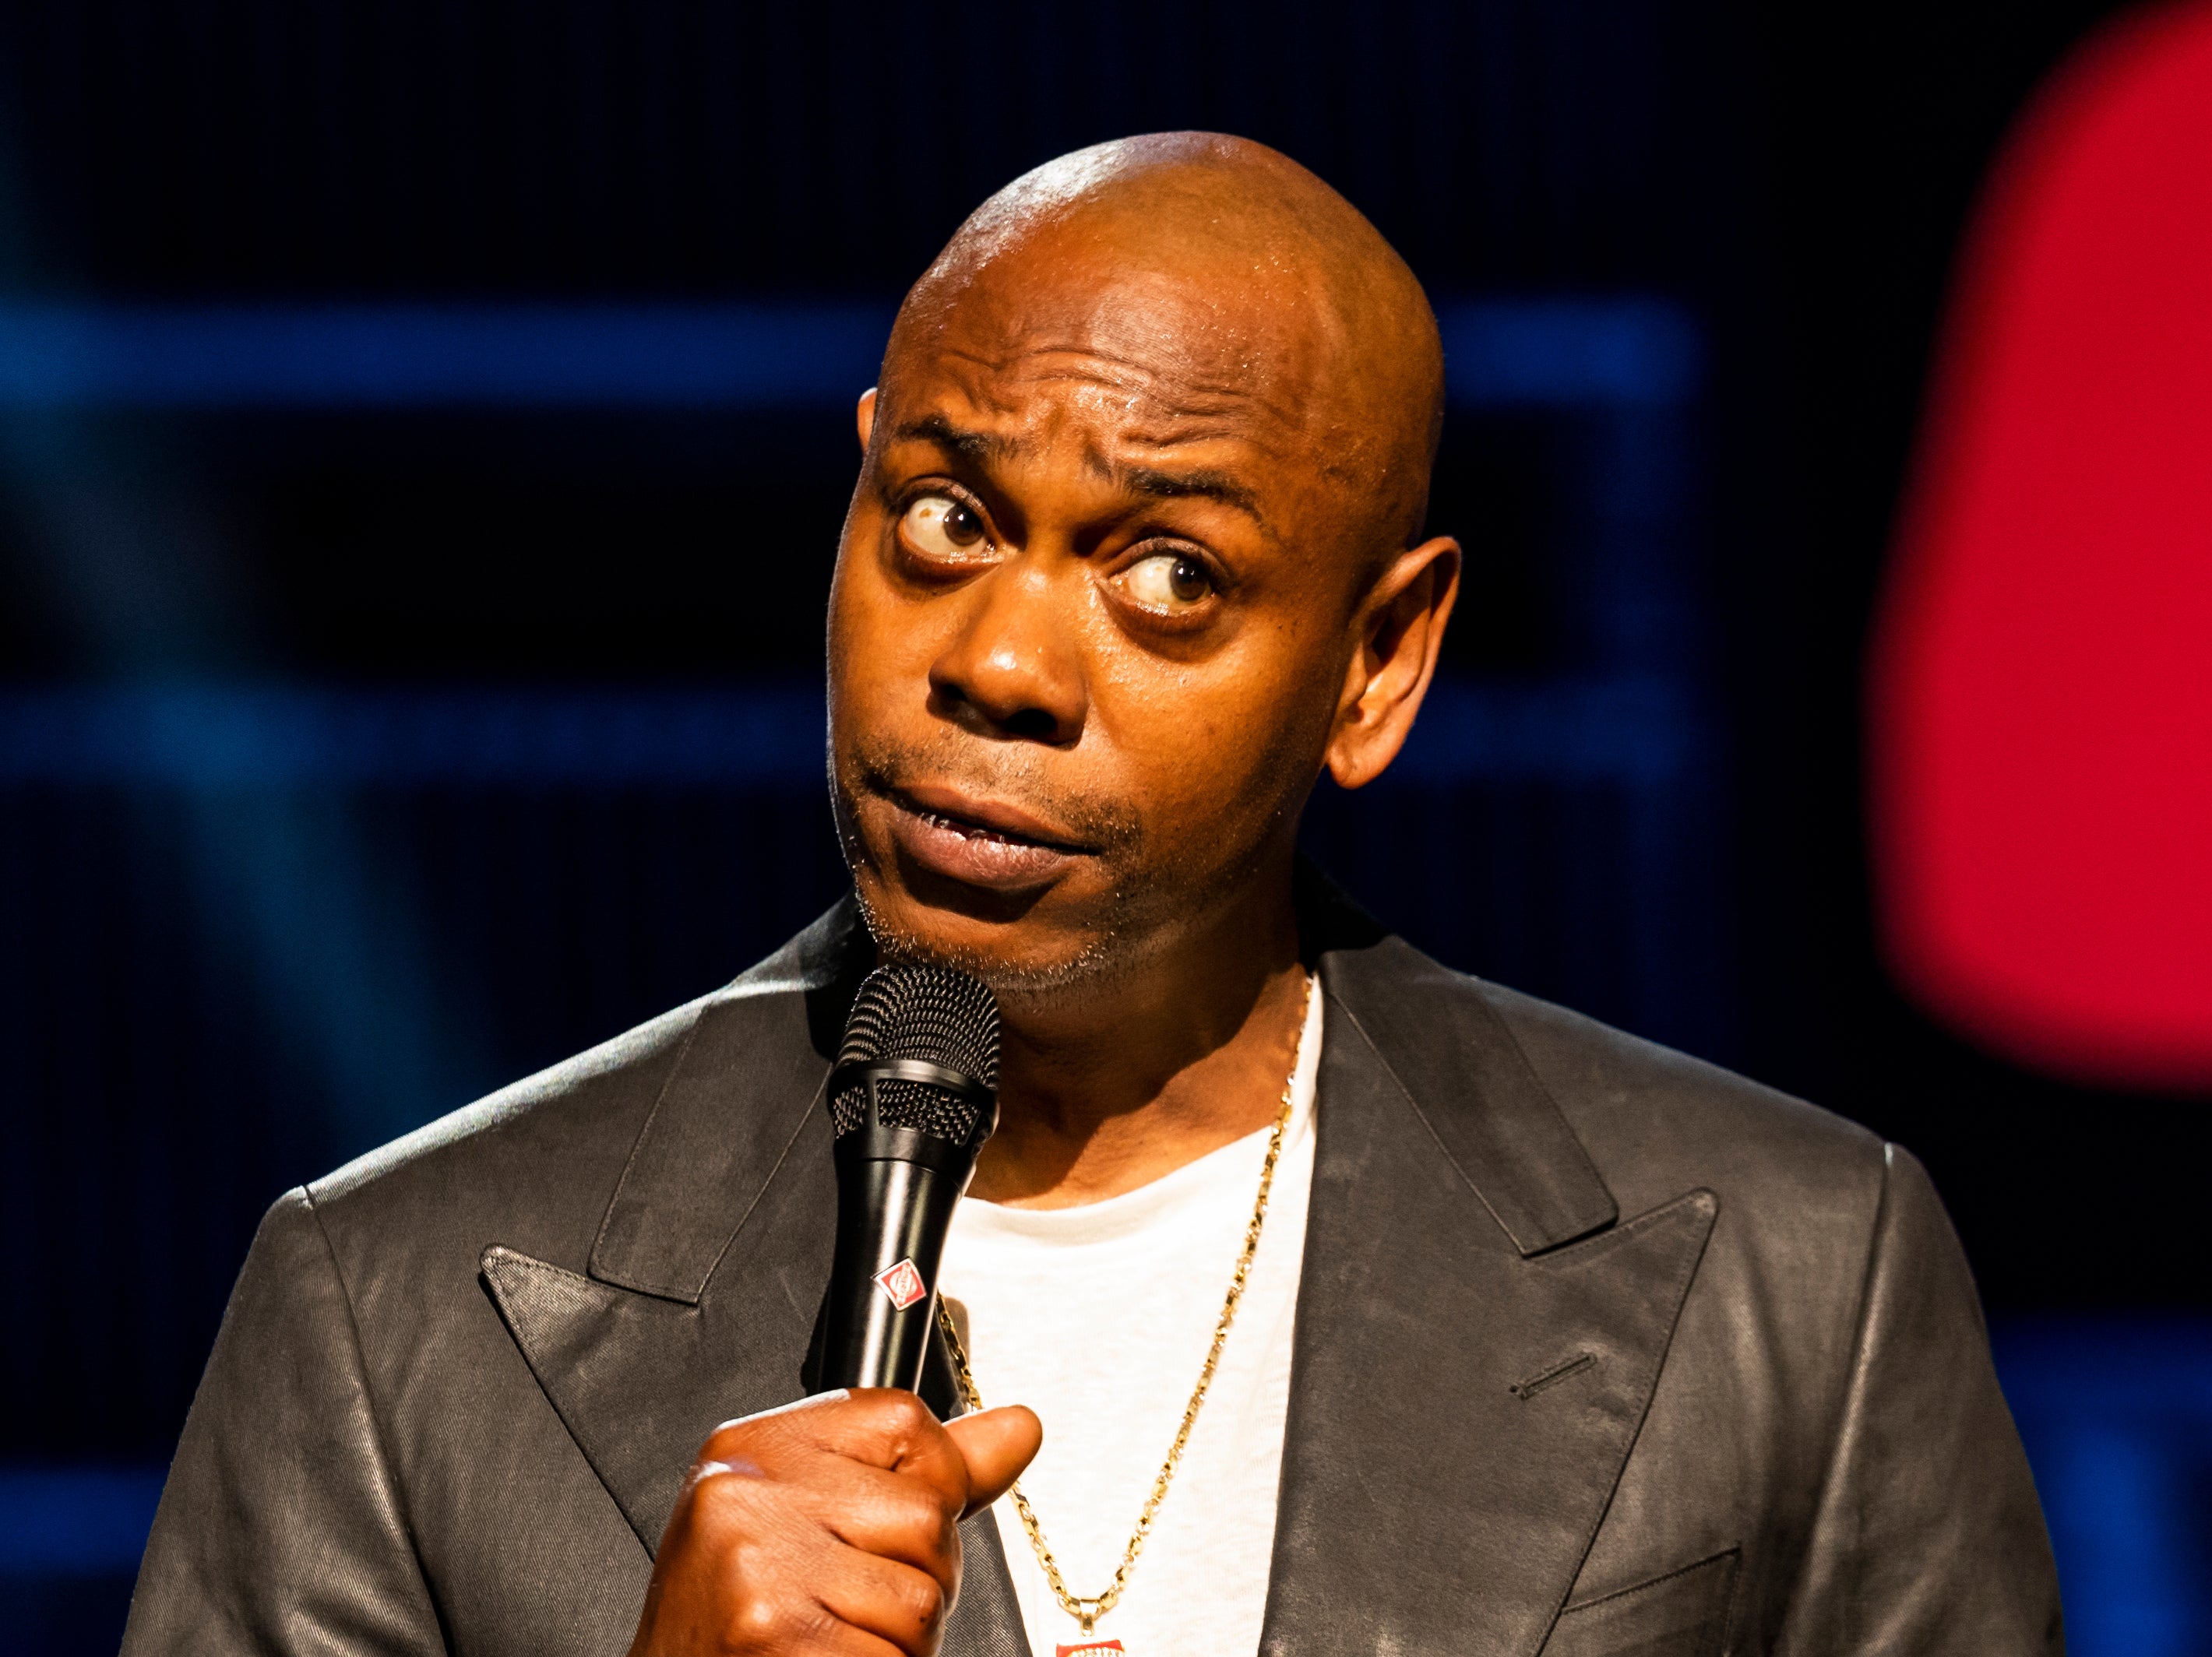 Meet the new Dave Chappelle picture